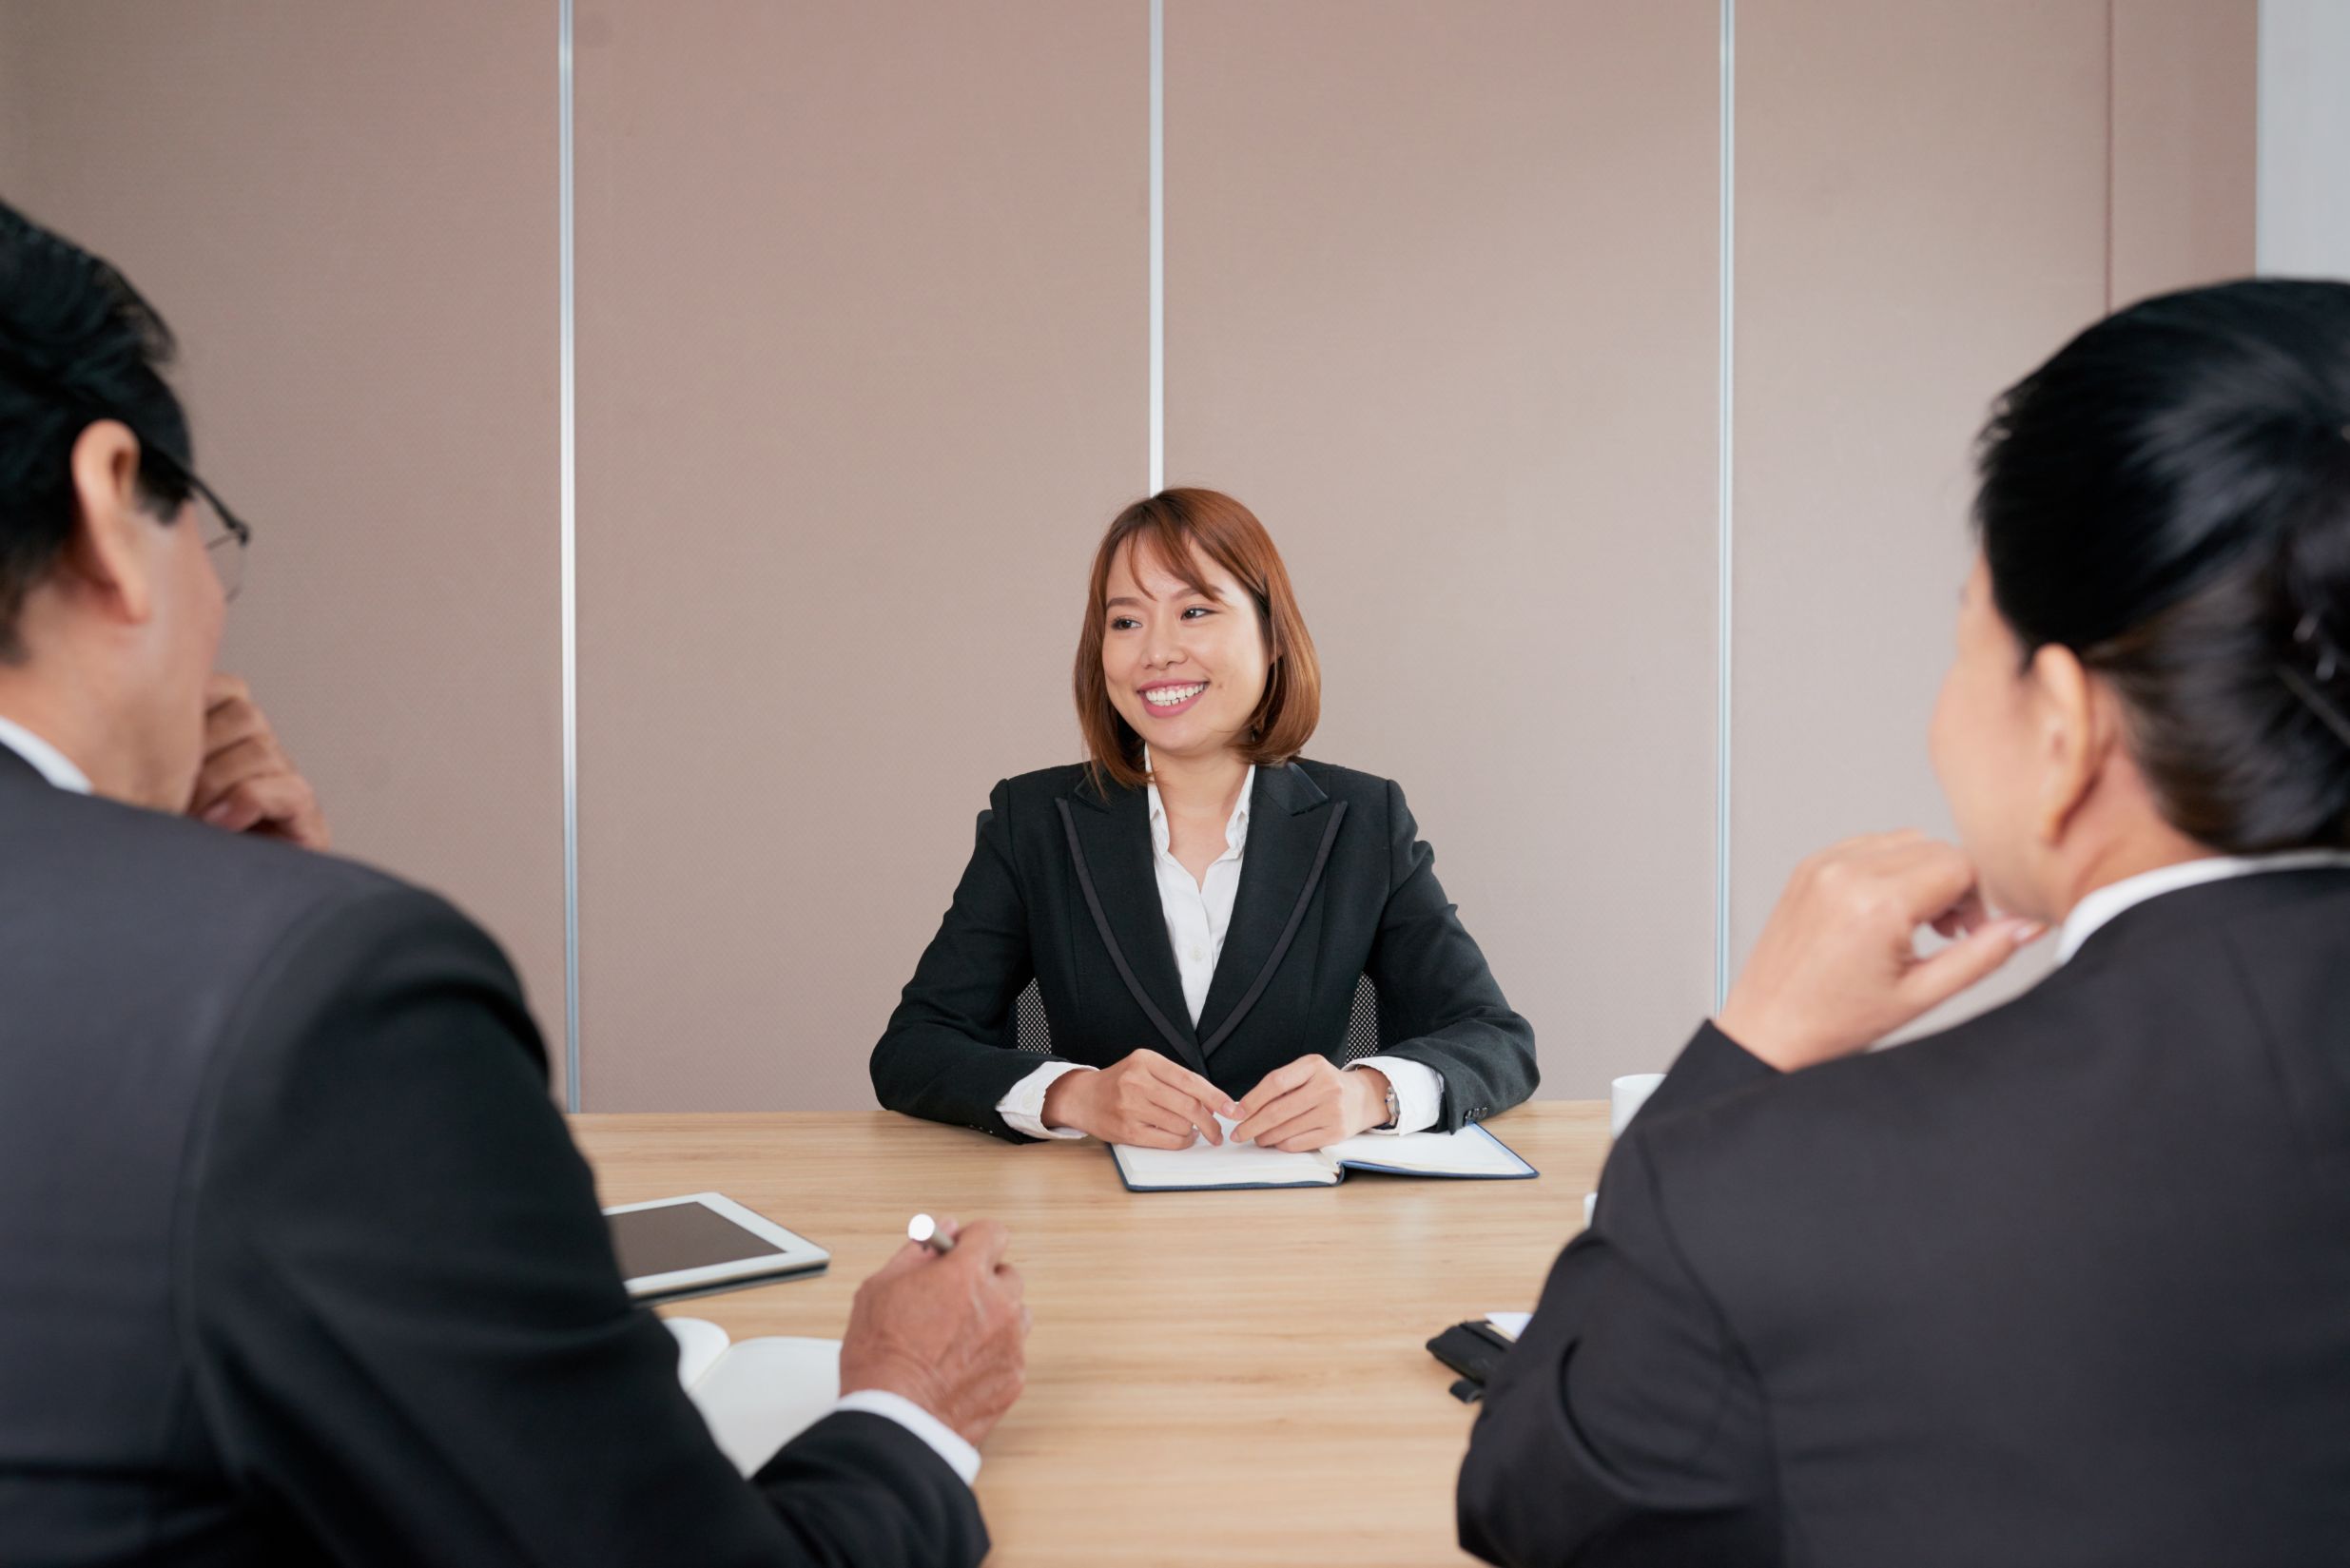 Women in an interview giving satisfactory answers